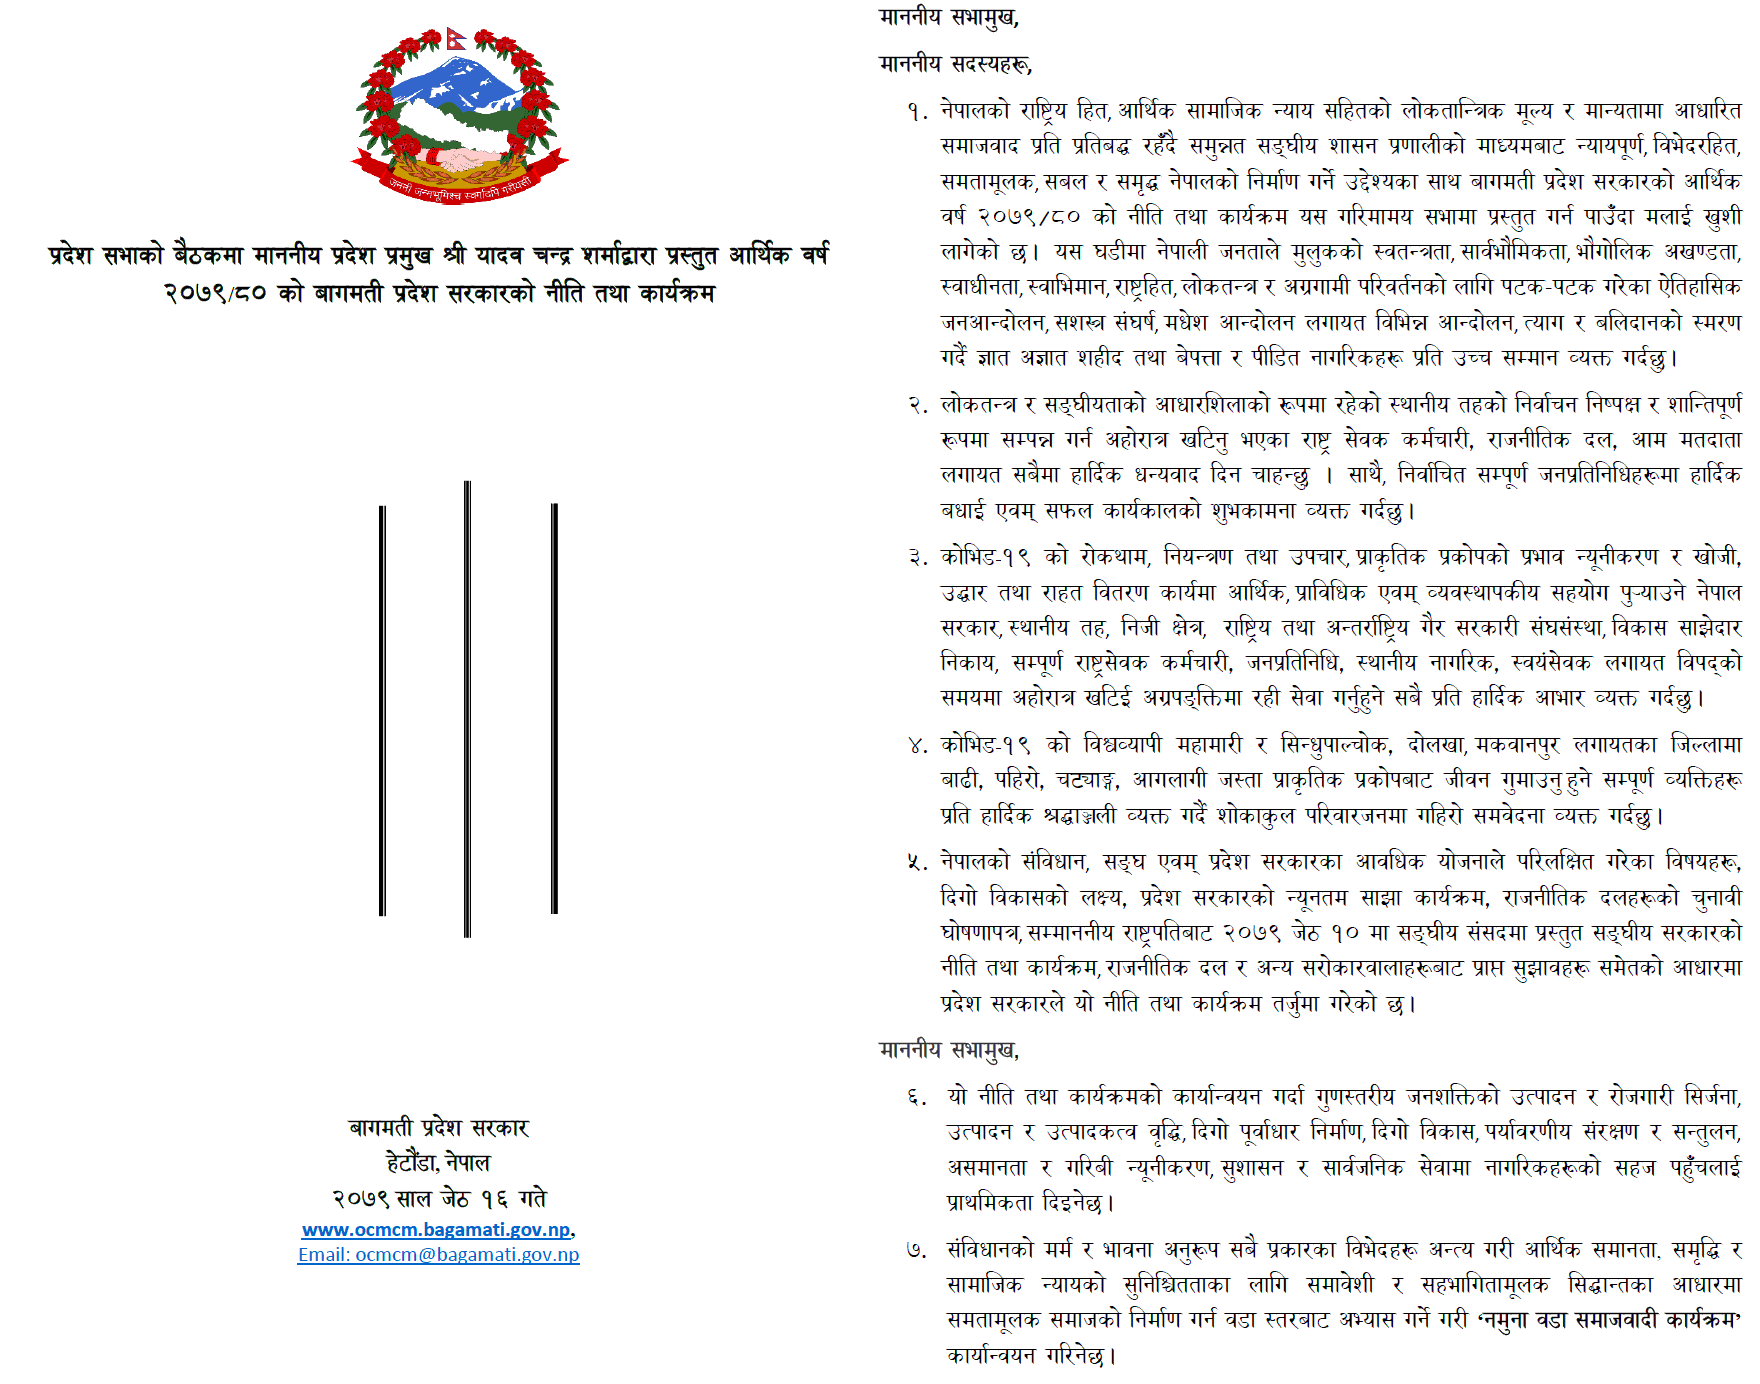 Bagmati Province Government Policies and Programs For the Fiscal Year 2079 80 BS